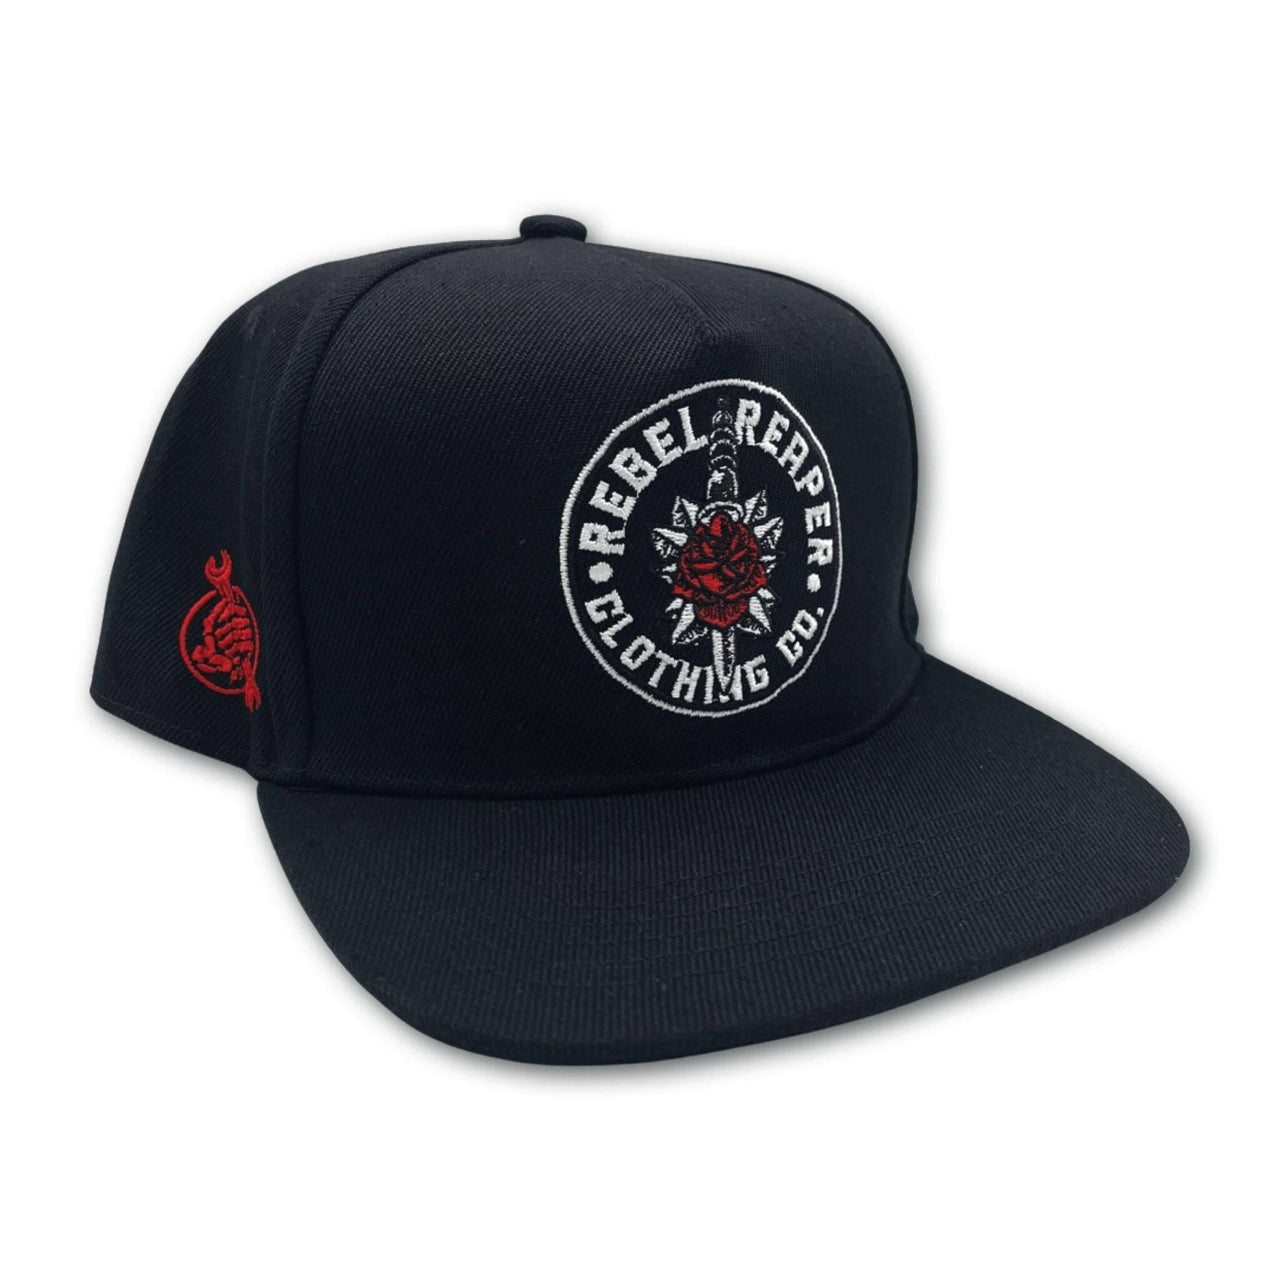 Tattoo Rose Embroidered Snapback - Rebel Reaper Clothing Company Hats - Snapback